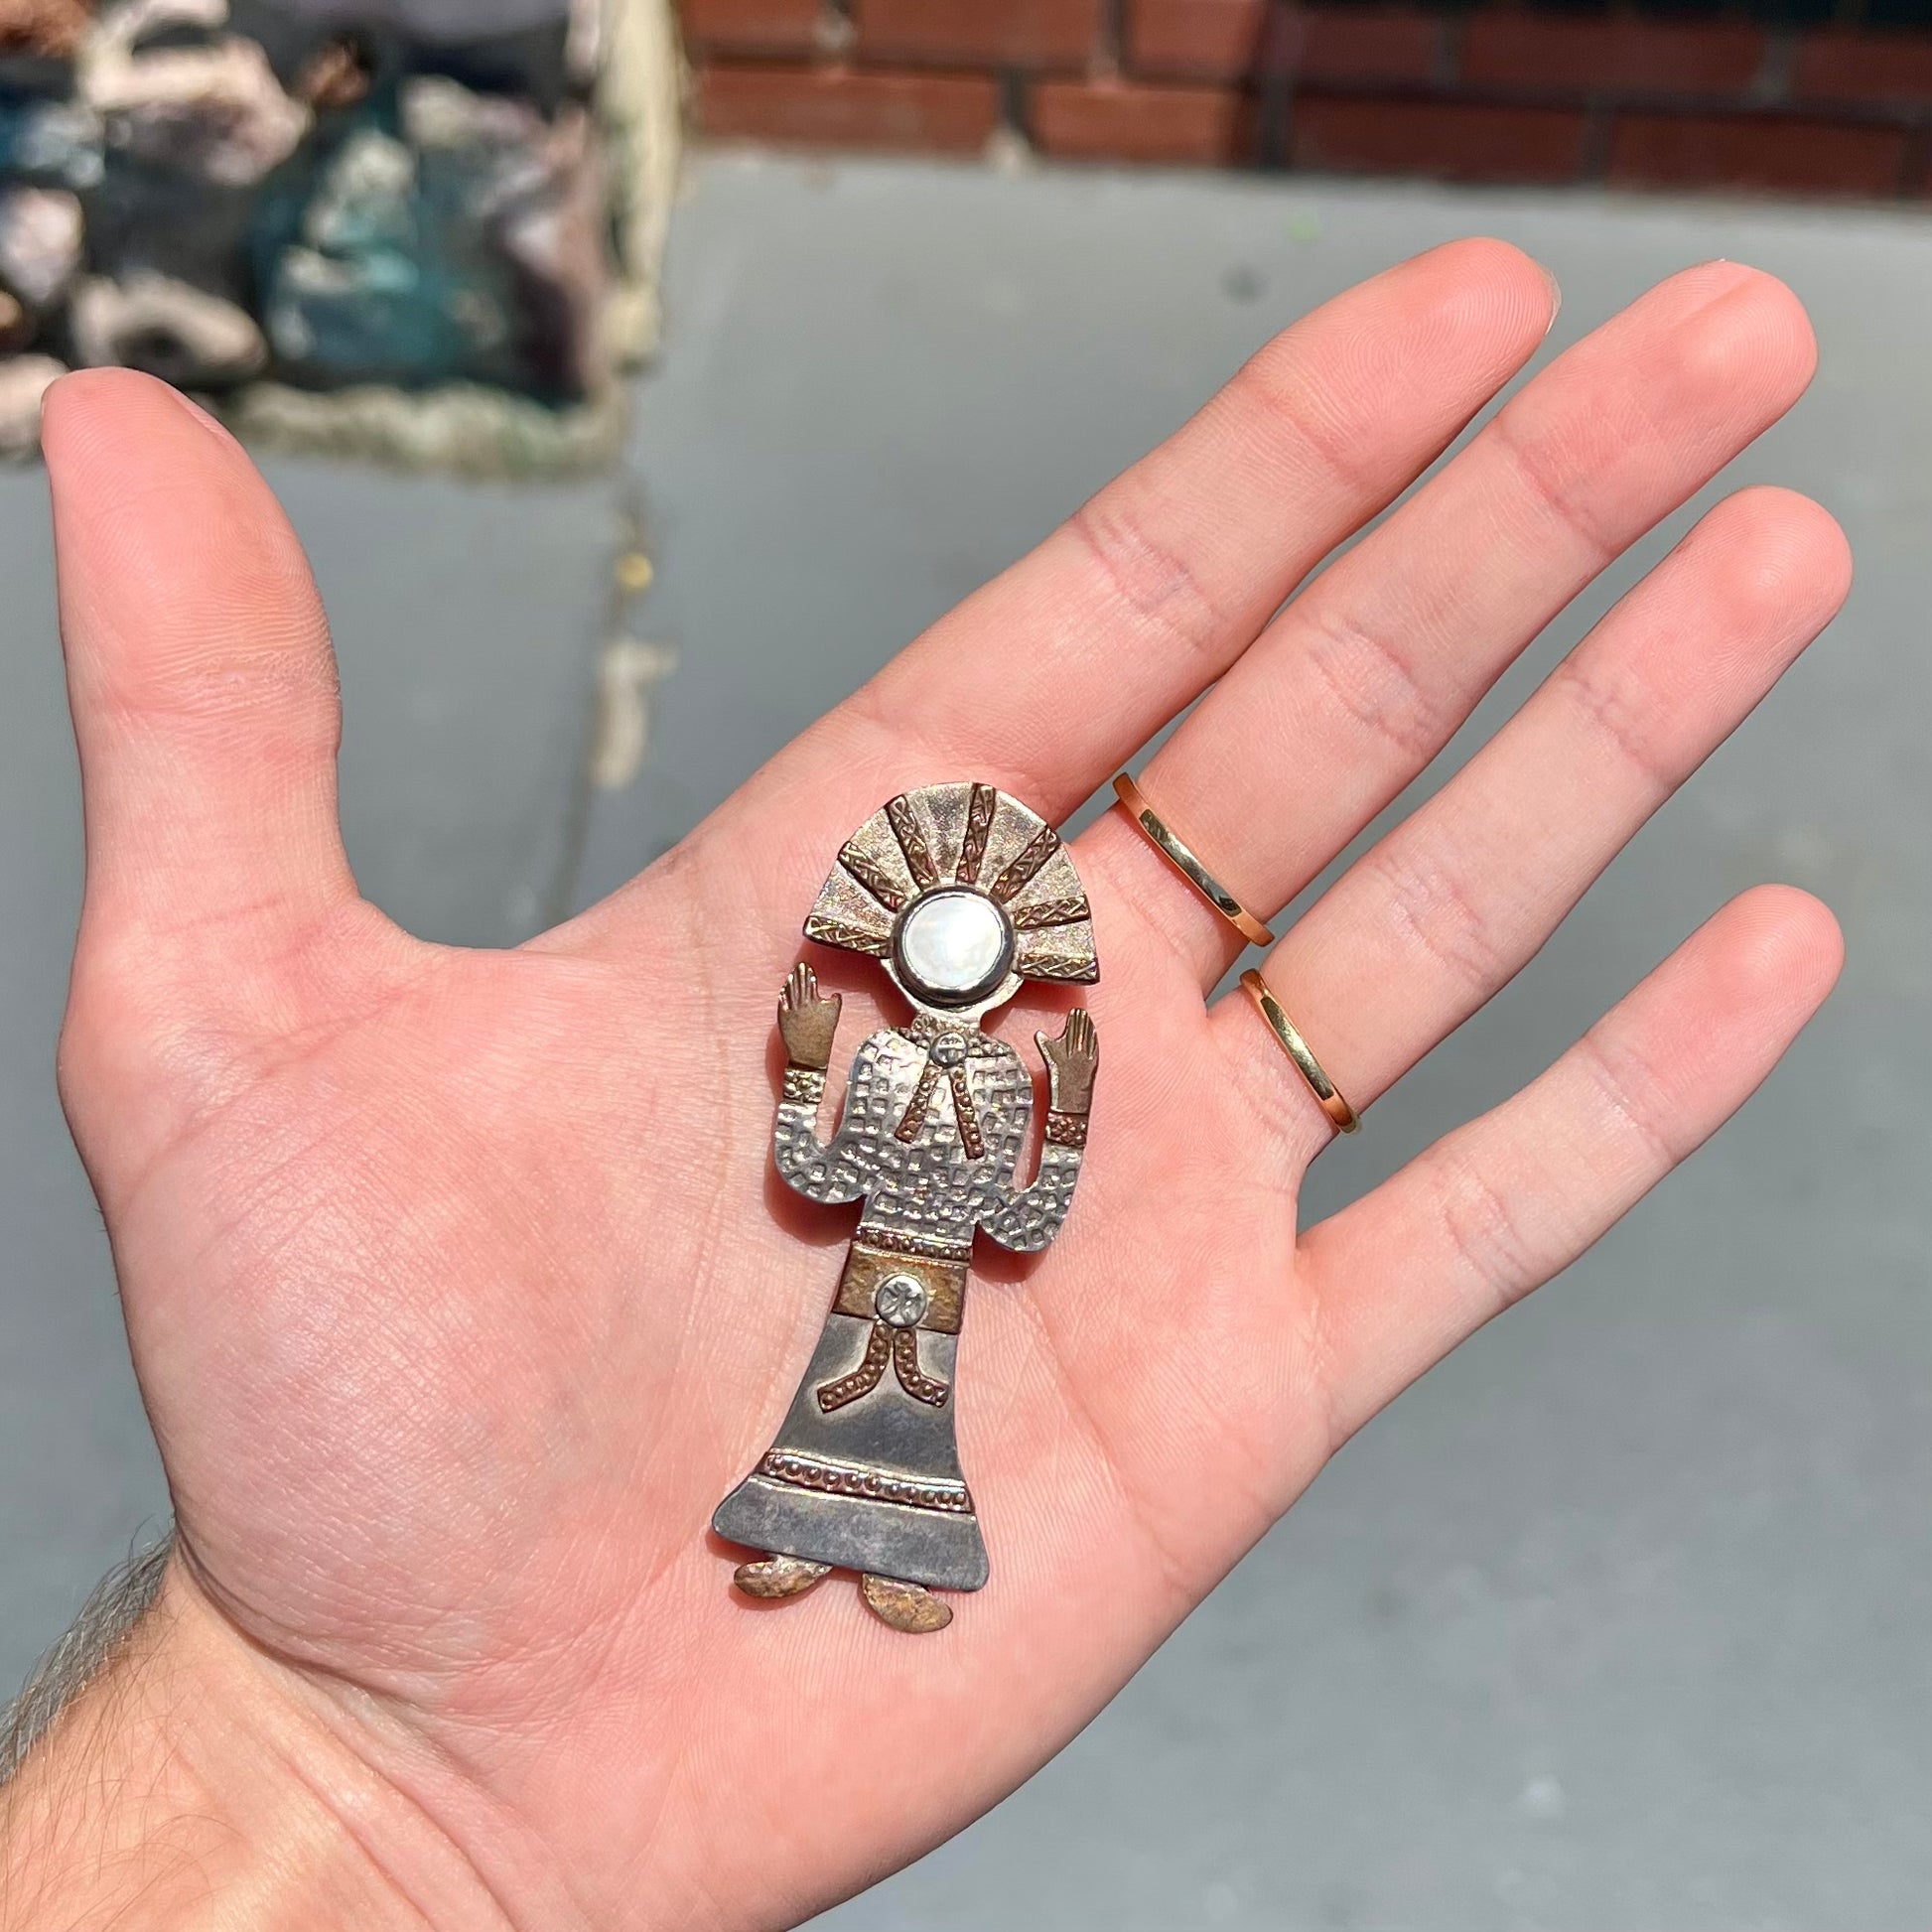 A handmade Navajo style silver pendant with copper highlights shaped like a Navajo Indian shaman.  There is a mother of pearl set as the shaman's face.